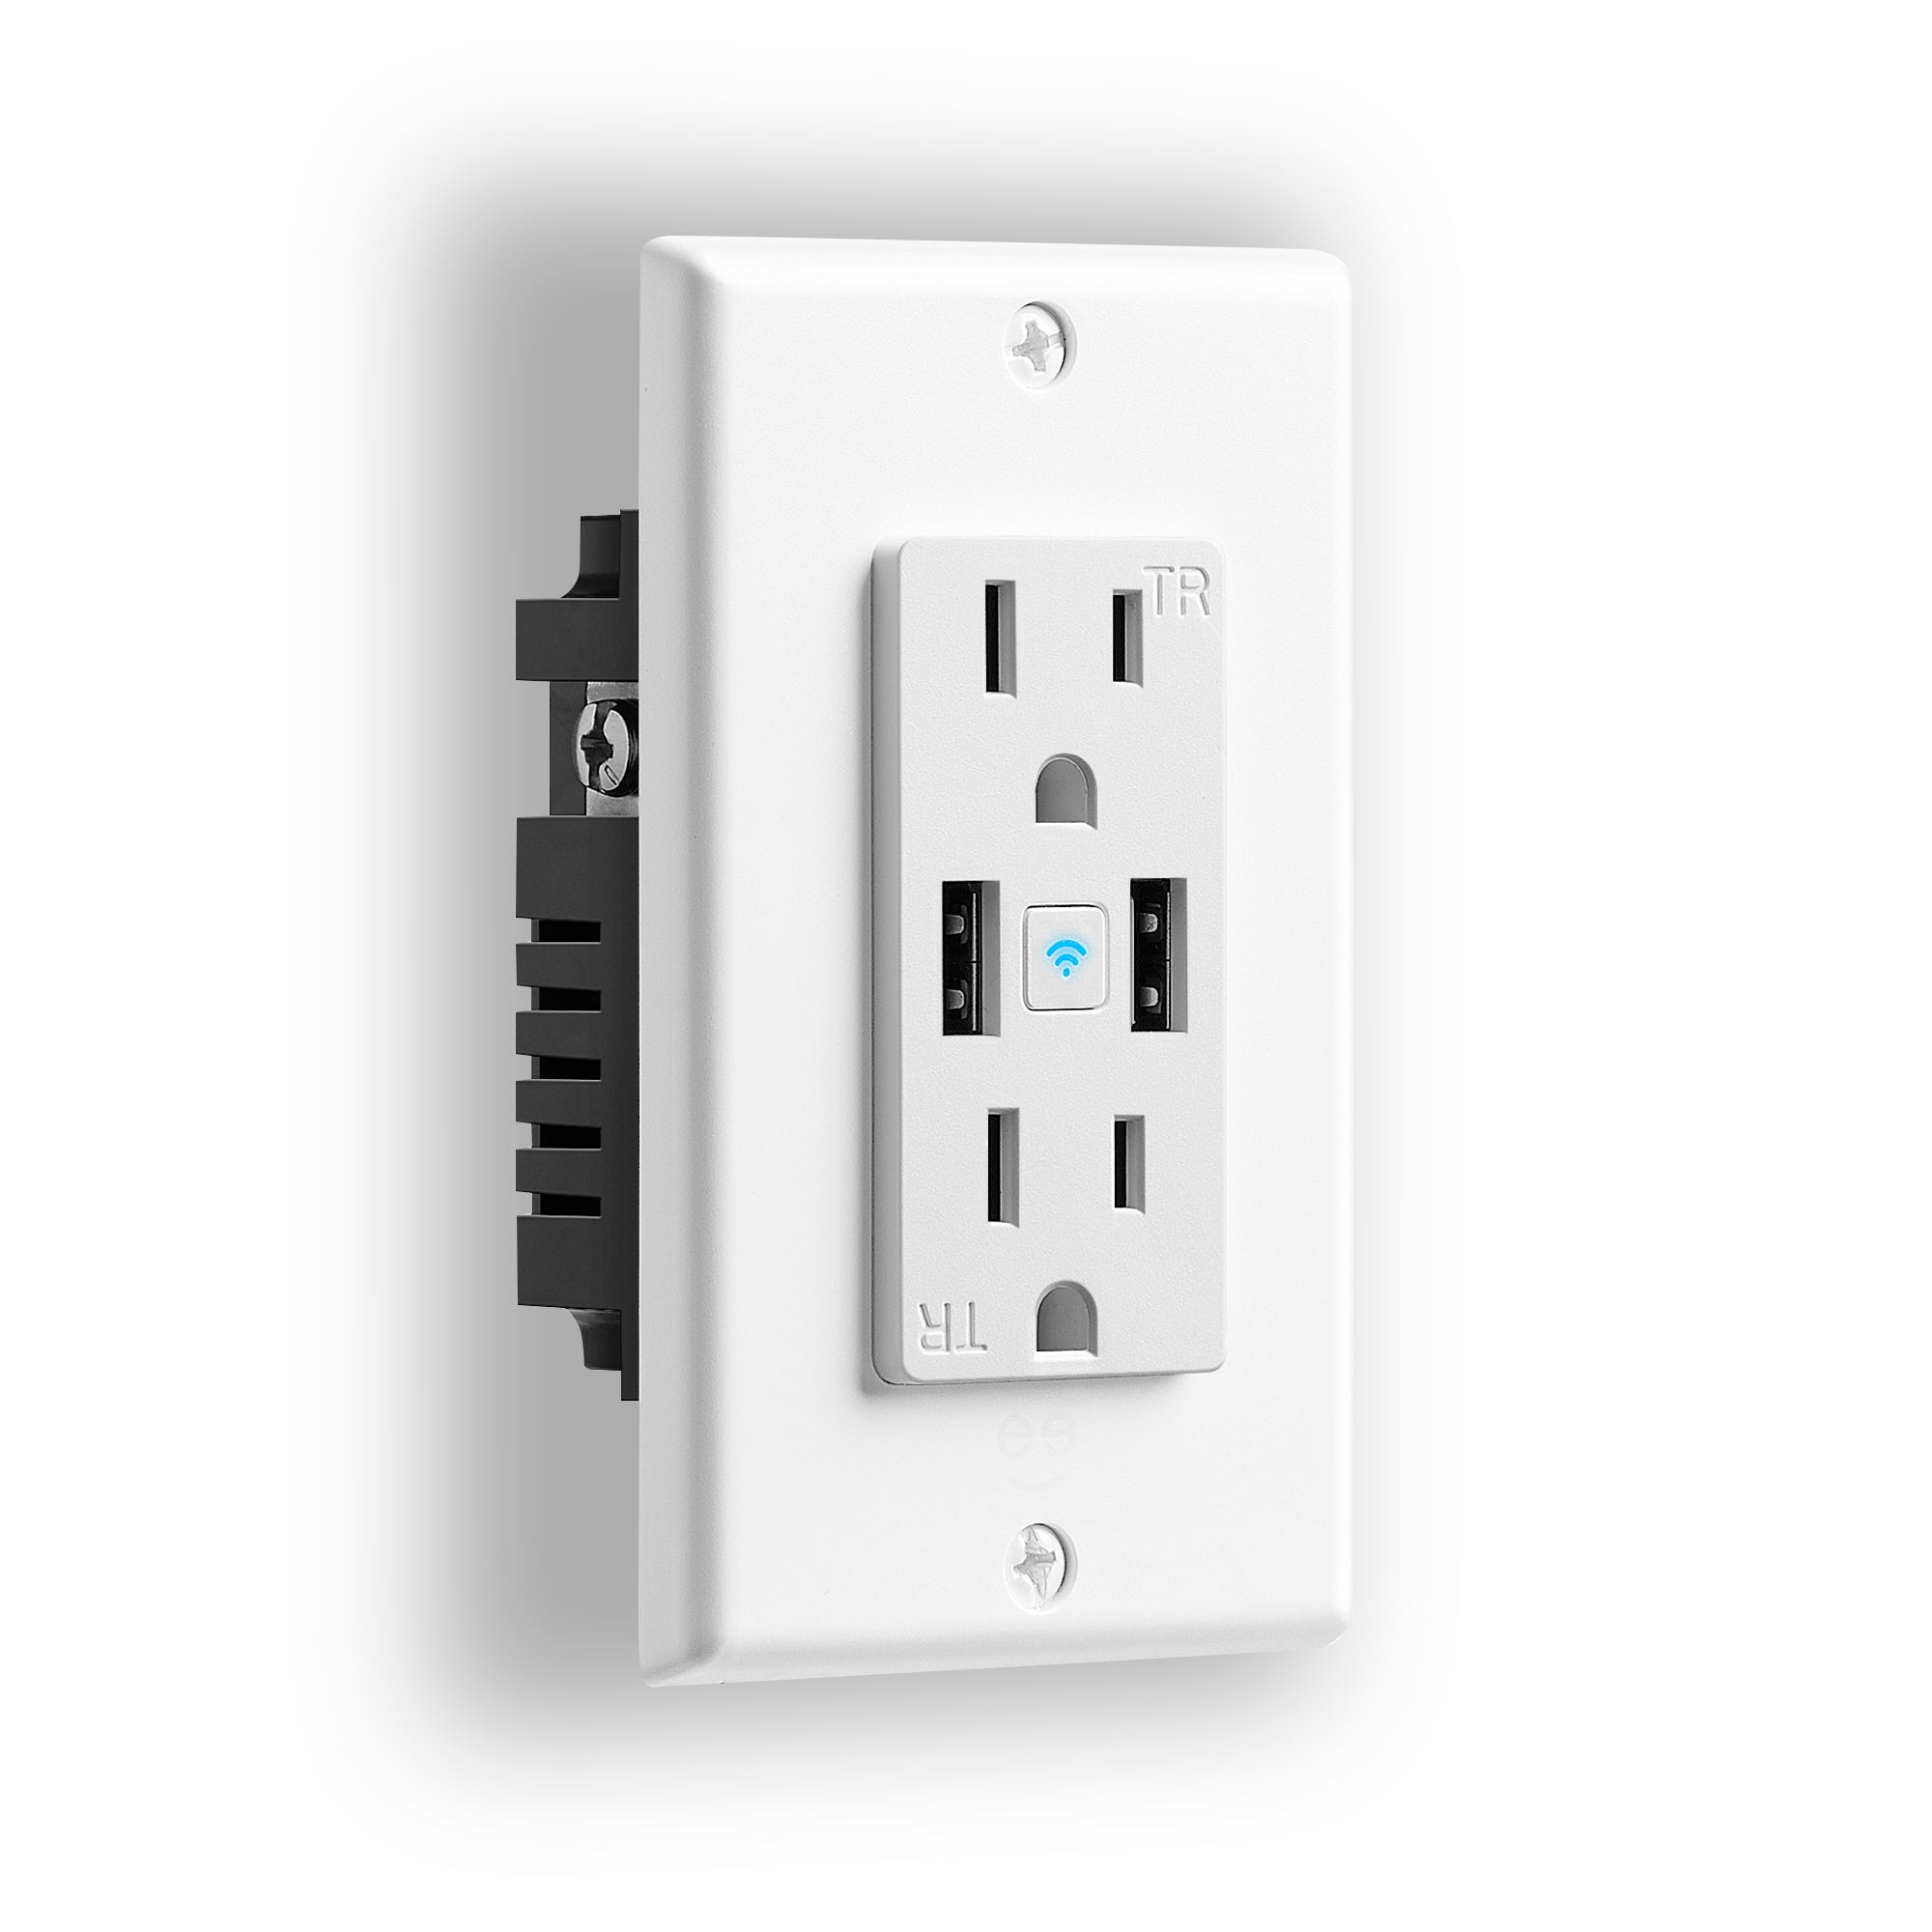 Geeni Current+Charge Wall Outlet (2 Plugs & 2 USB Ports)